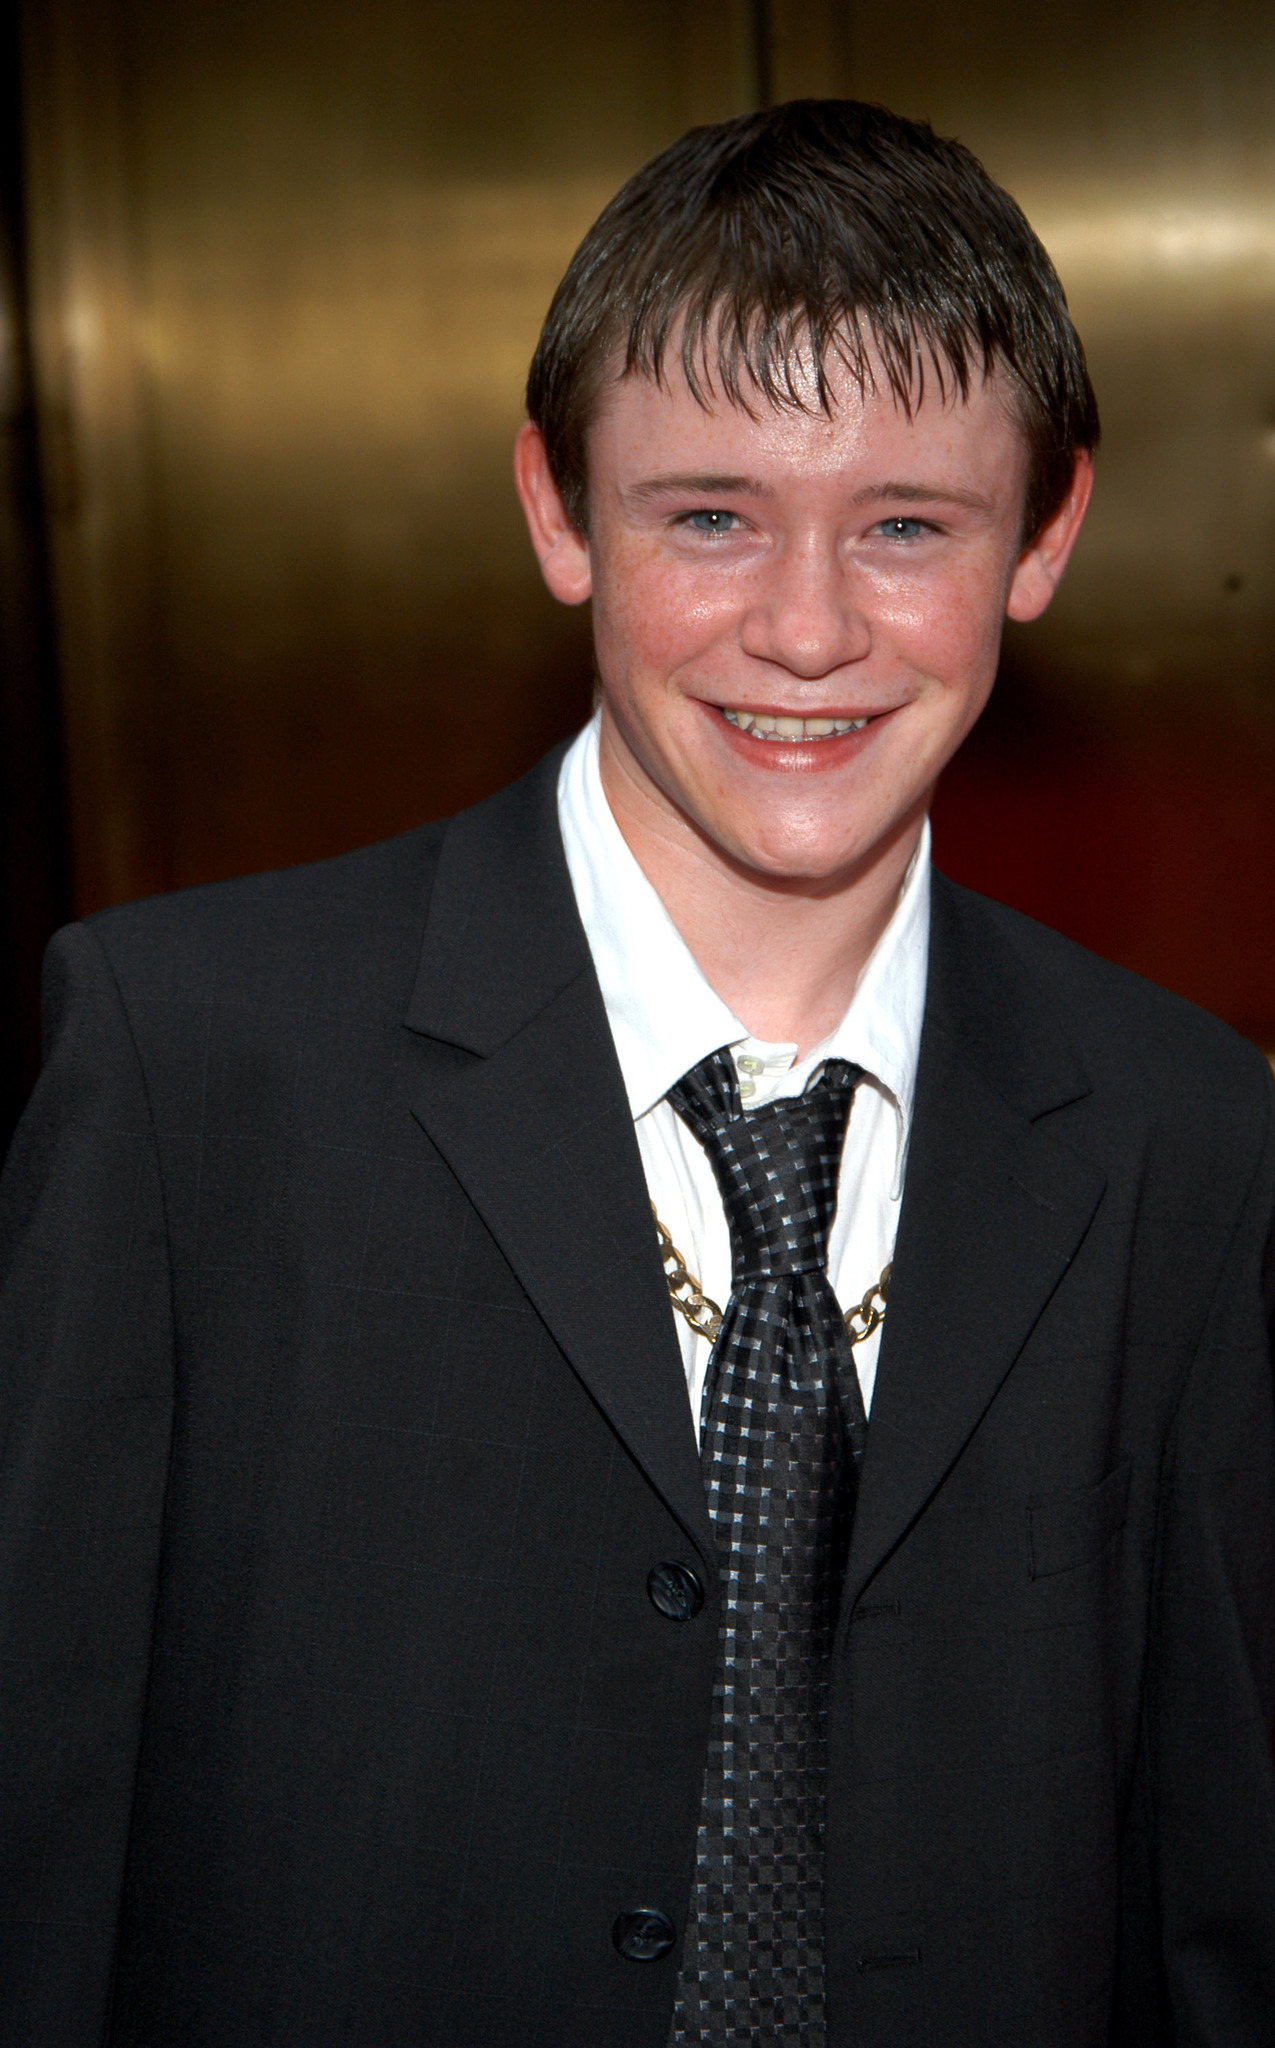 Who portrayed Seamus Finnigan in the Harry Potter movies? 2